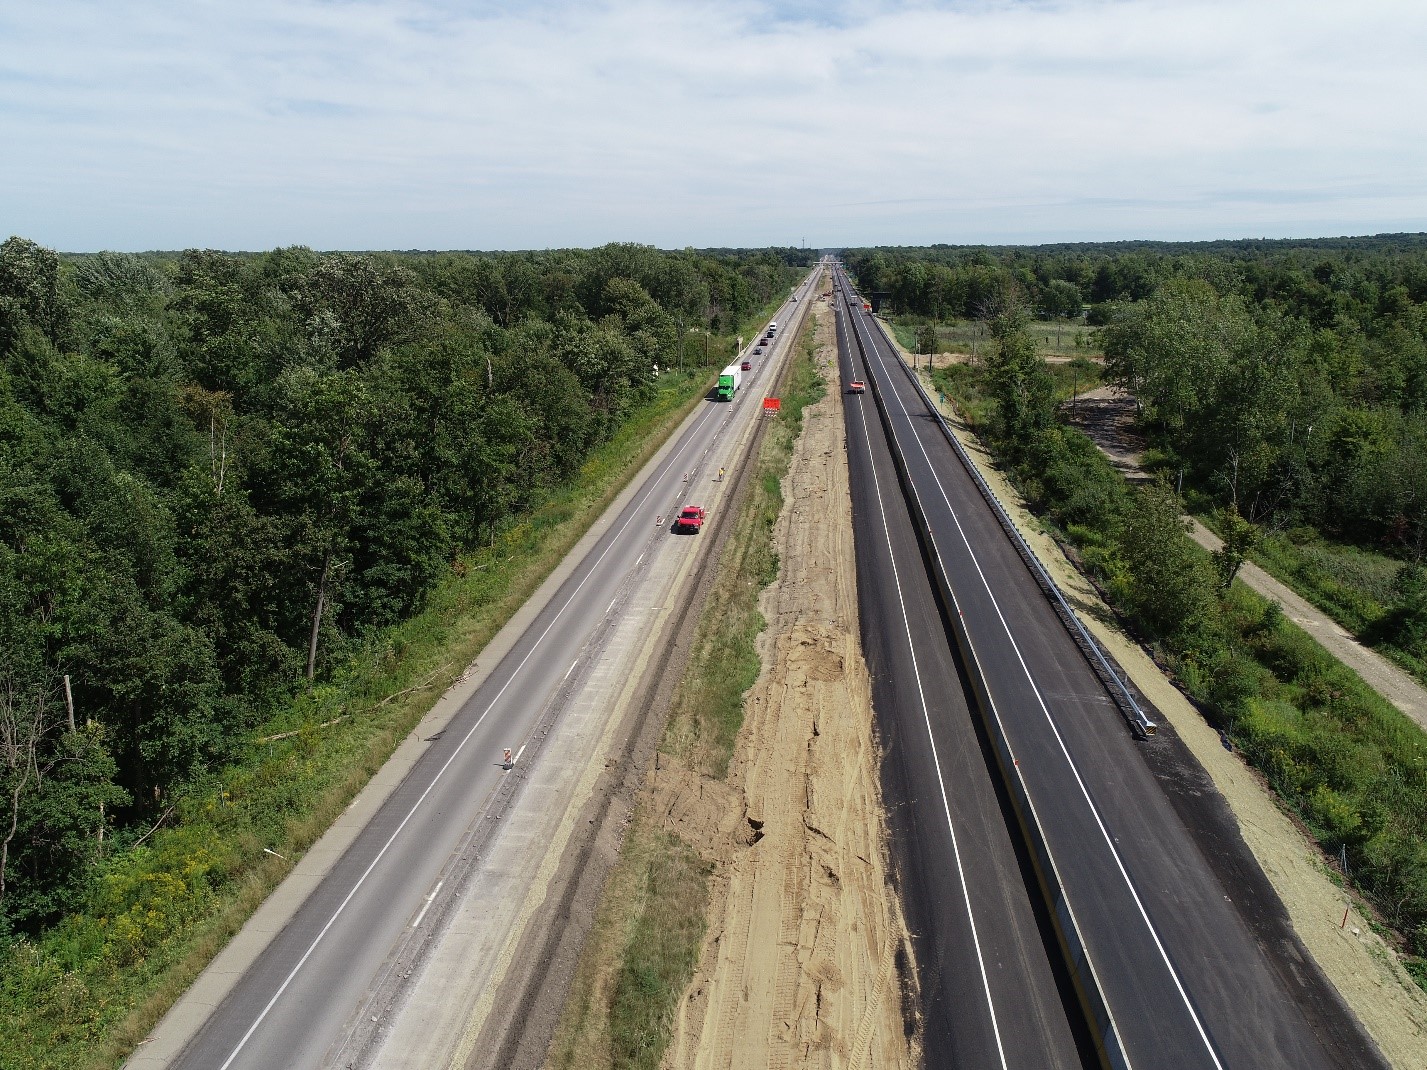 Overhead shot of a four-lane interstate with a grass media and trees on either side.